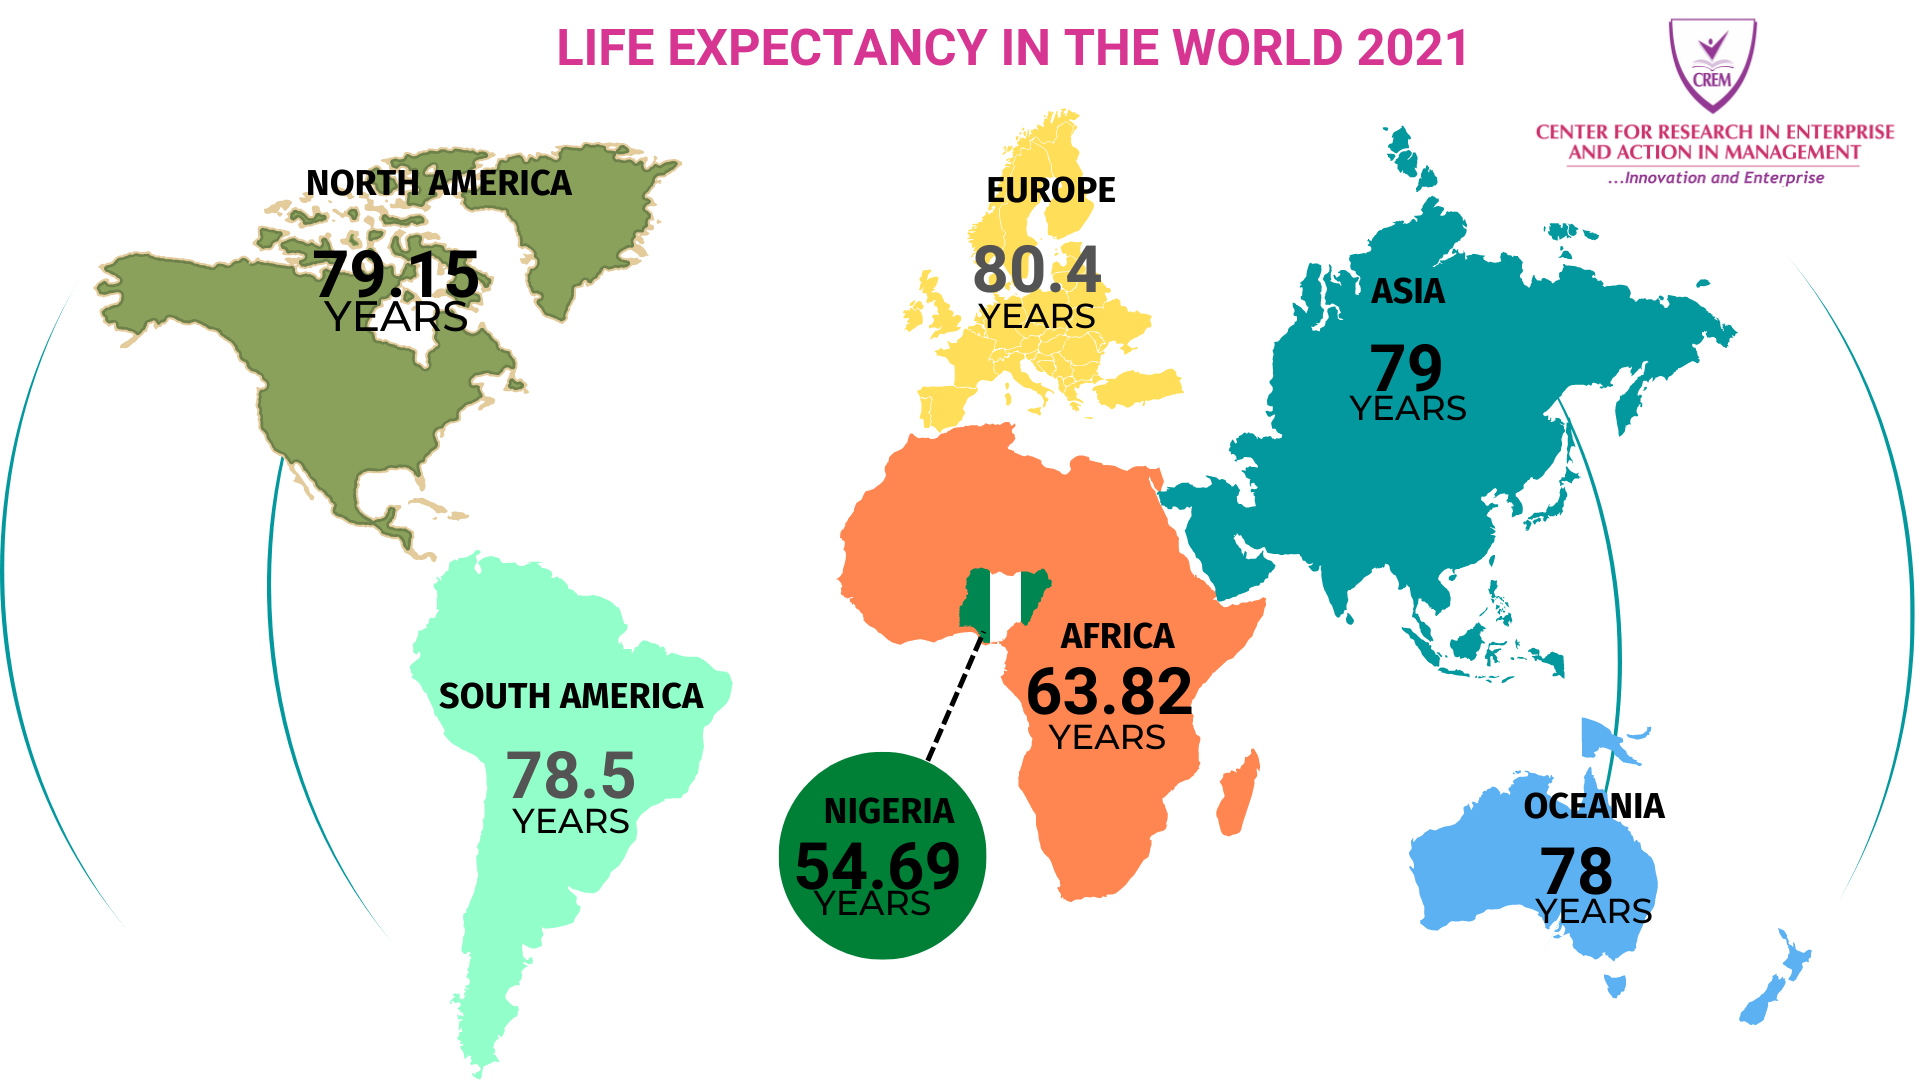 Life Expectancy in the World 2021